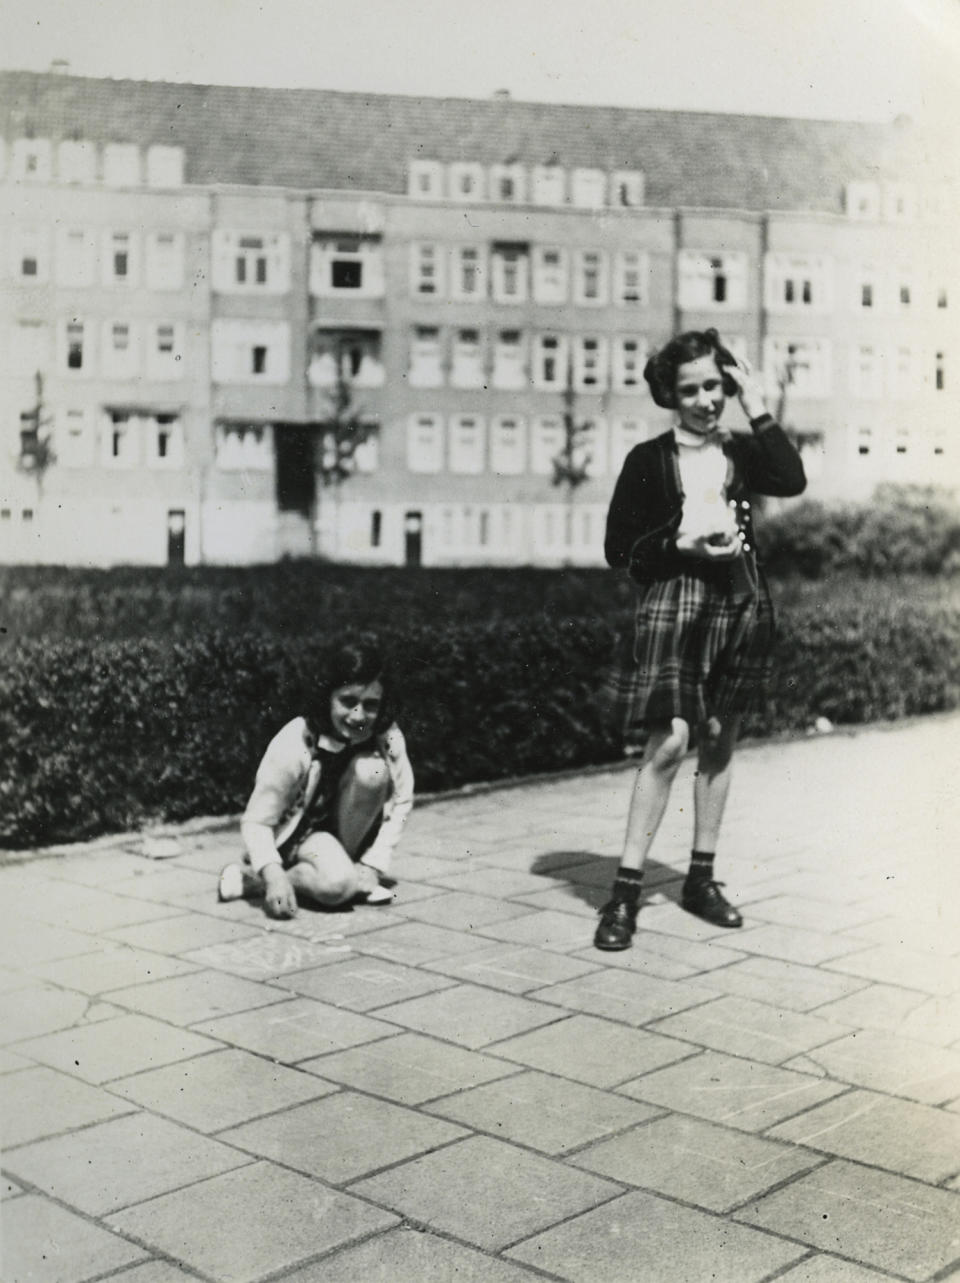 In this May 1941 photo provided by the Anne Frank House Amsterdam on Tuesday, Feb. 4, 2014, Anne Frank, left, plays with her friend Hanneli Goslar, right, on the Merwedeplein square in Amsterdam. Shortly before Anne Frank and her family went into hiding from the Nazis, she gave away some of her toys to non-Jewish neighborhood girlfriend Toosje Kupers for safekeeping. The toys have now been recovered and Anne's tin of marbles will go on display for the first time this week at an art gallery in Rotterdam, the Anne Frank House Museum says. (AP Photo/Anne Frank House Amsterdam/Anne Frank Fonds Basel photo collections)